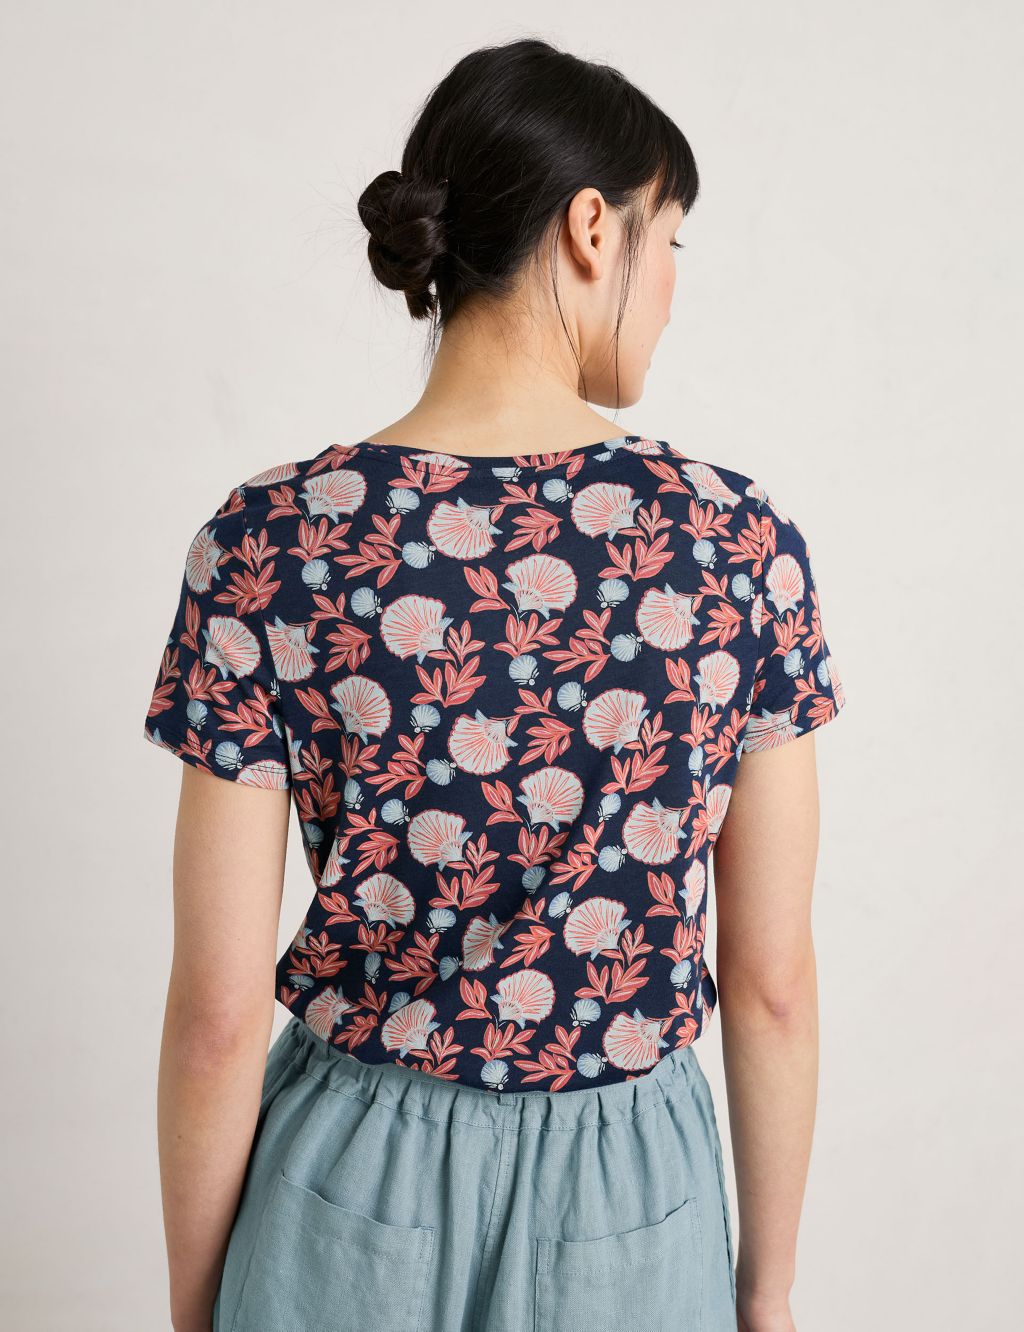 Cotton Blend Floral Relaxed Top image 3